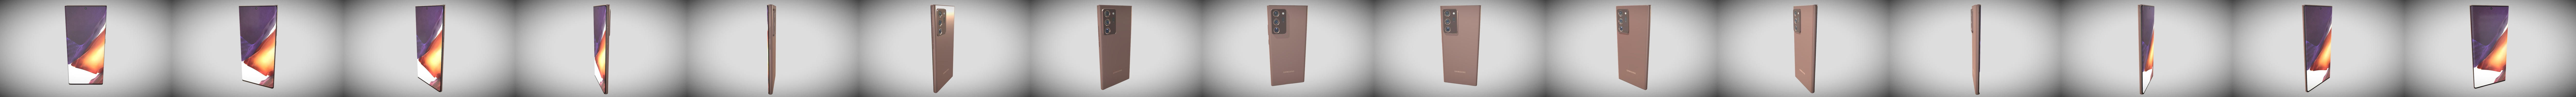 Samsung Galaxy Note20 Ultra Mystic White 3D model download